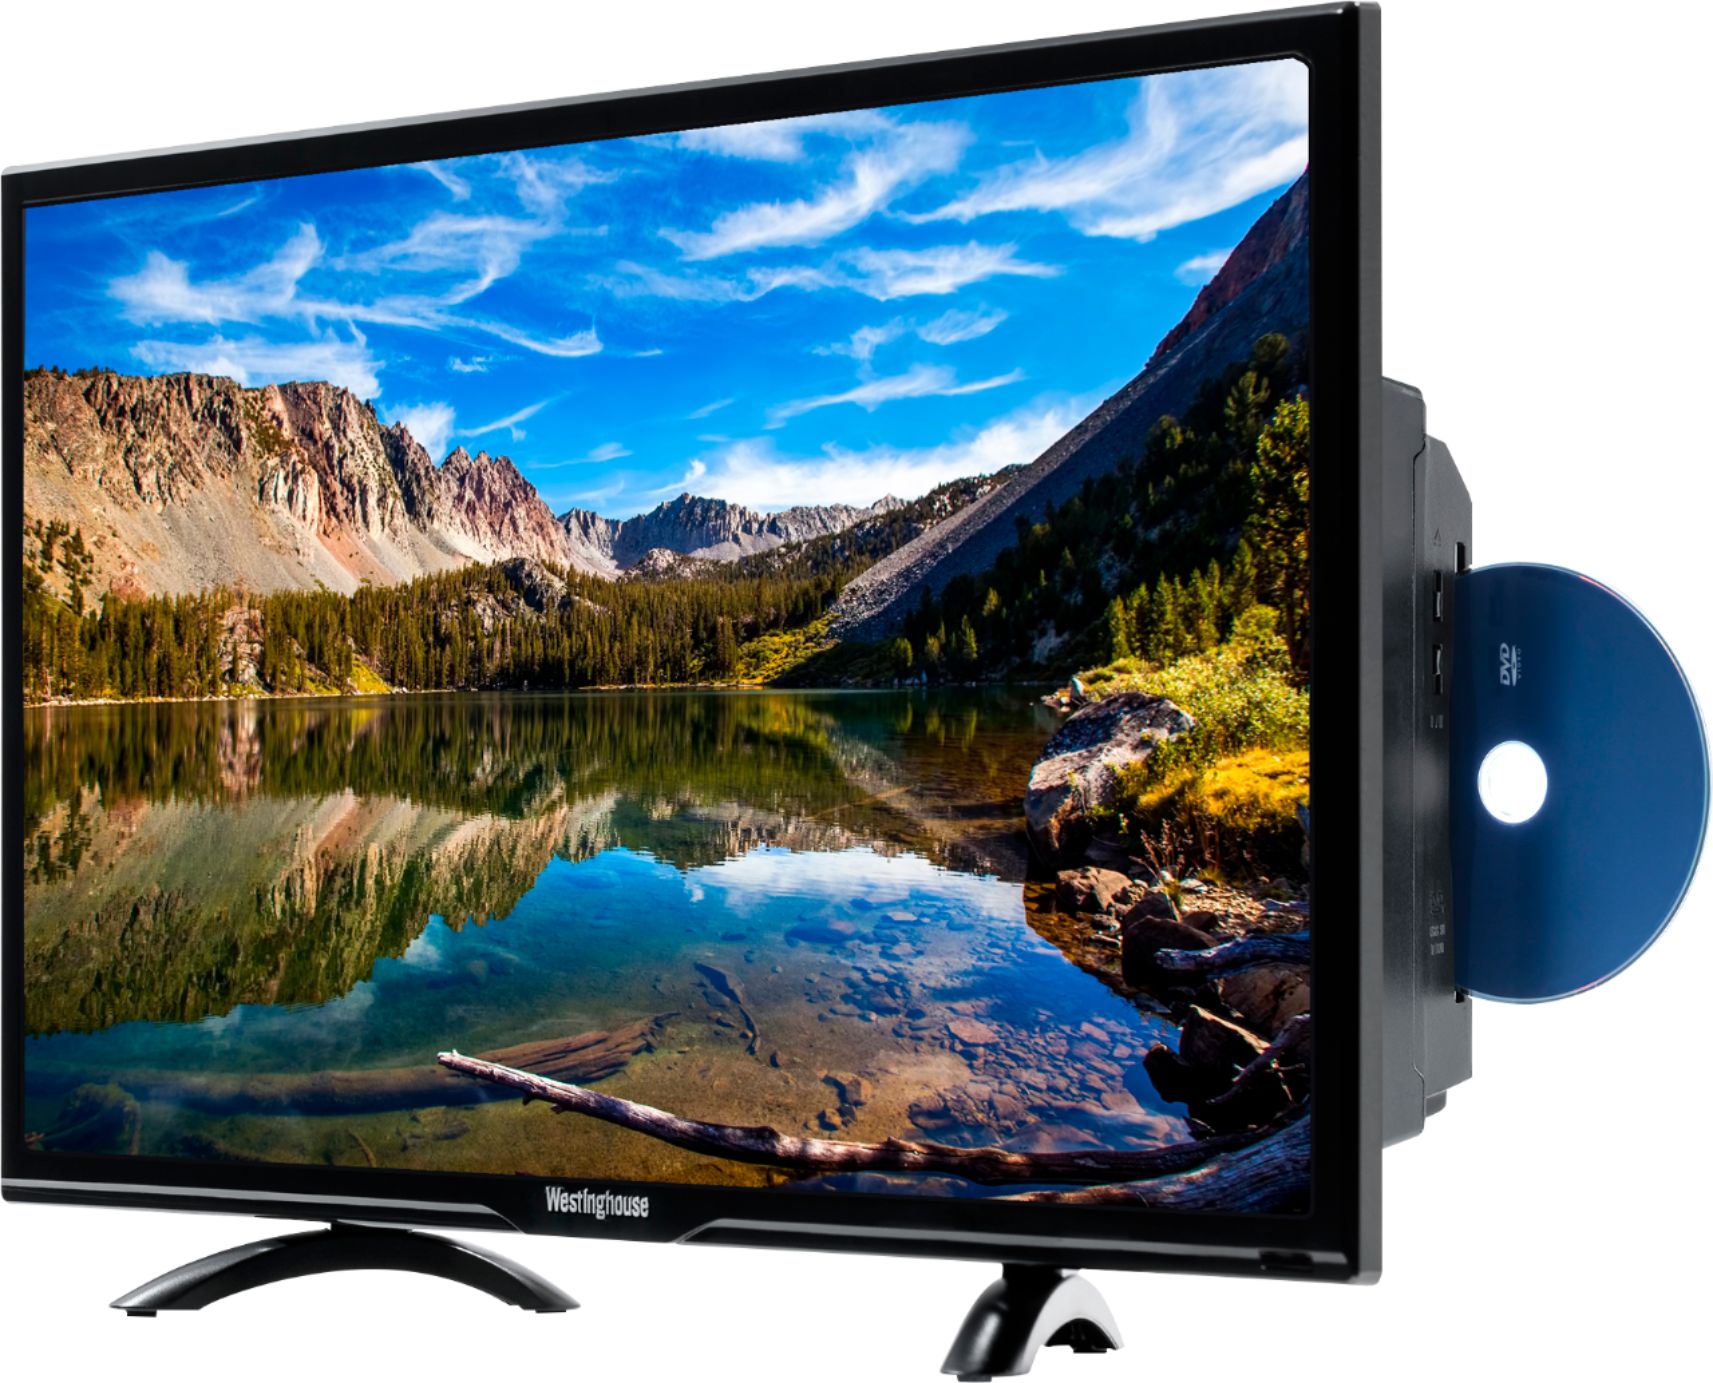 Left View: Westinghouse - 24" Class LED HD TV/DVD Combo